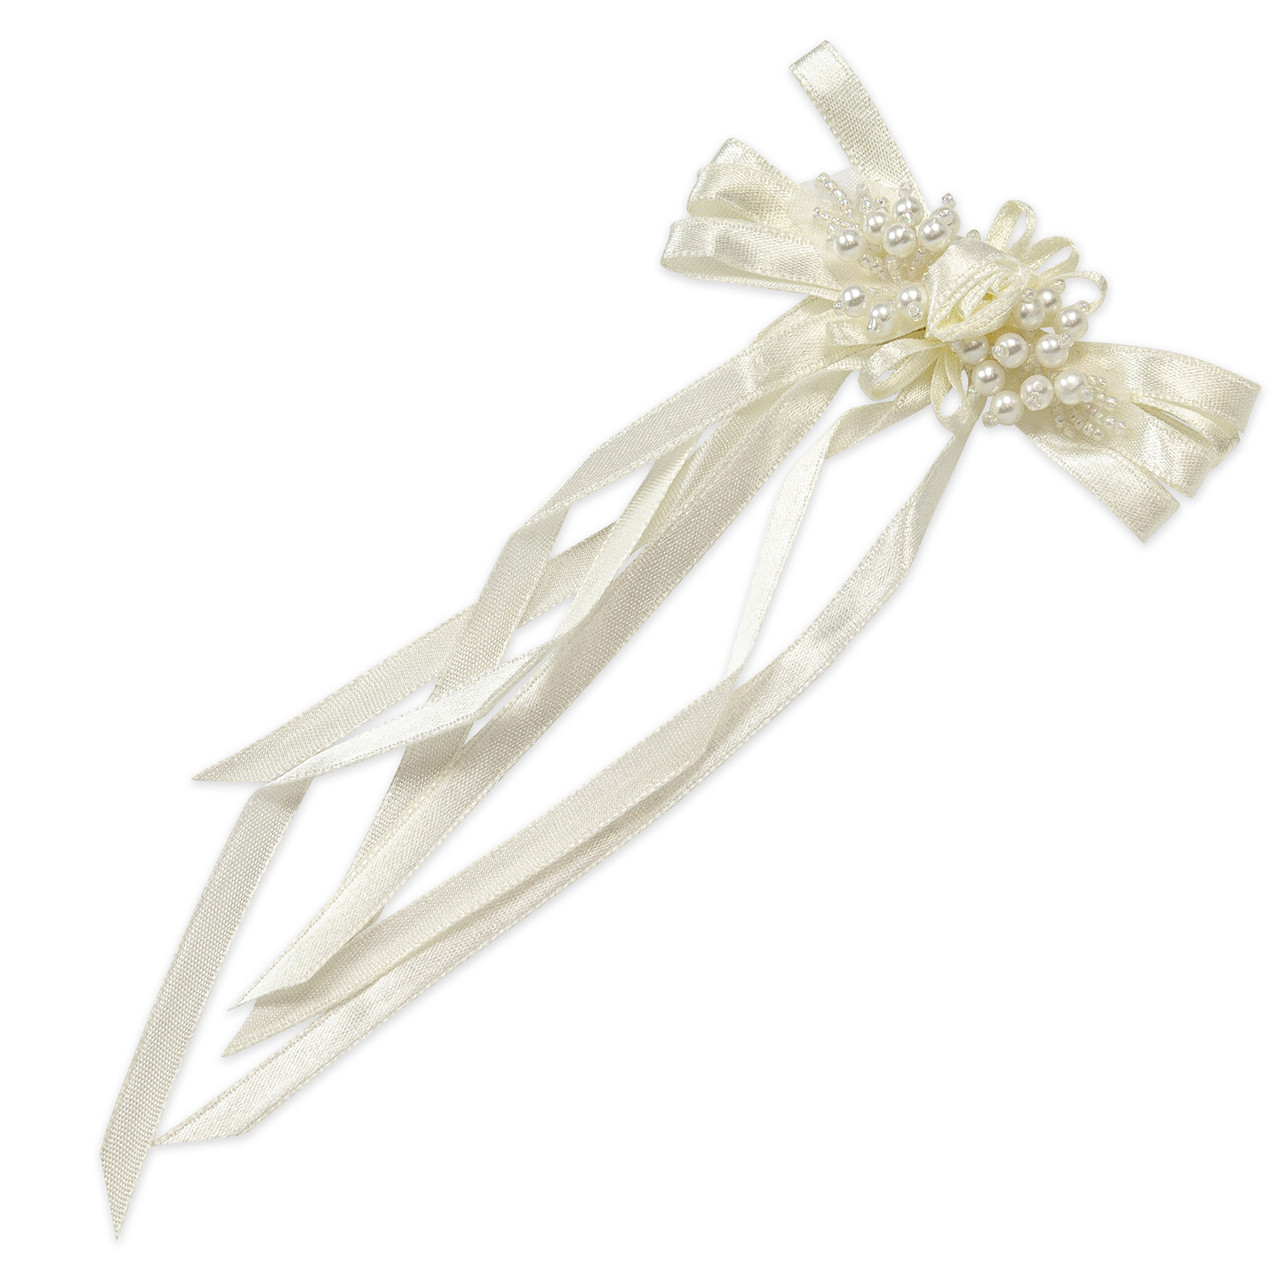 Expo Int'l Bridal Ribbon Bow with Rosette and Pearls Applique, White